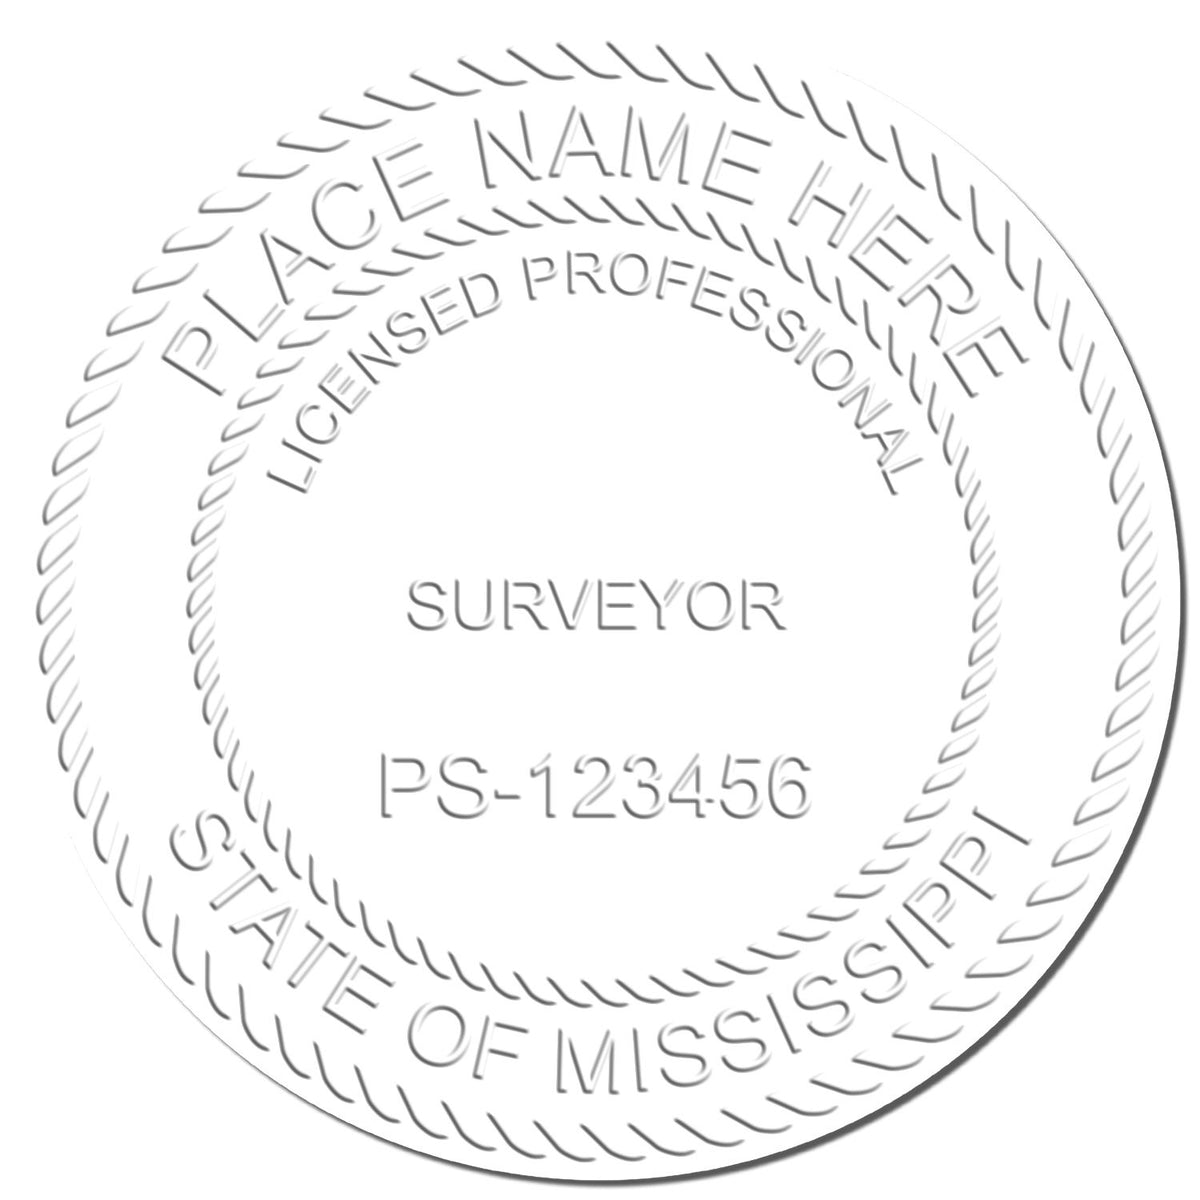 This paper is stamped with a sample imprint of the Long Reach Mississippi Land Surveyor Seal, signifying its quality and reliability.